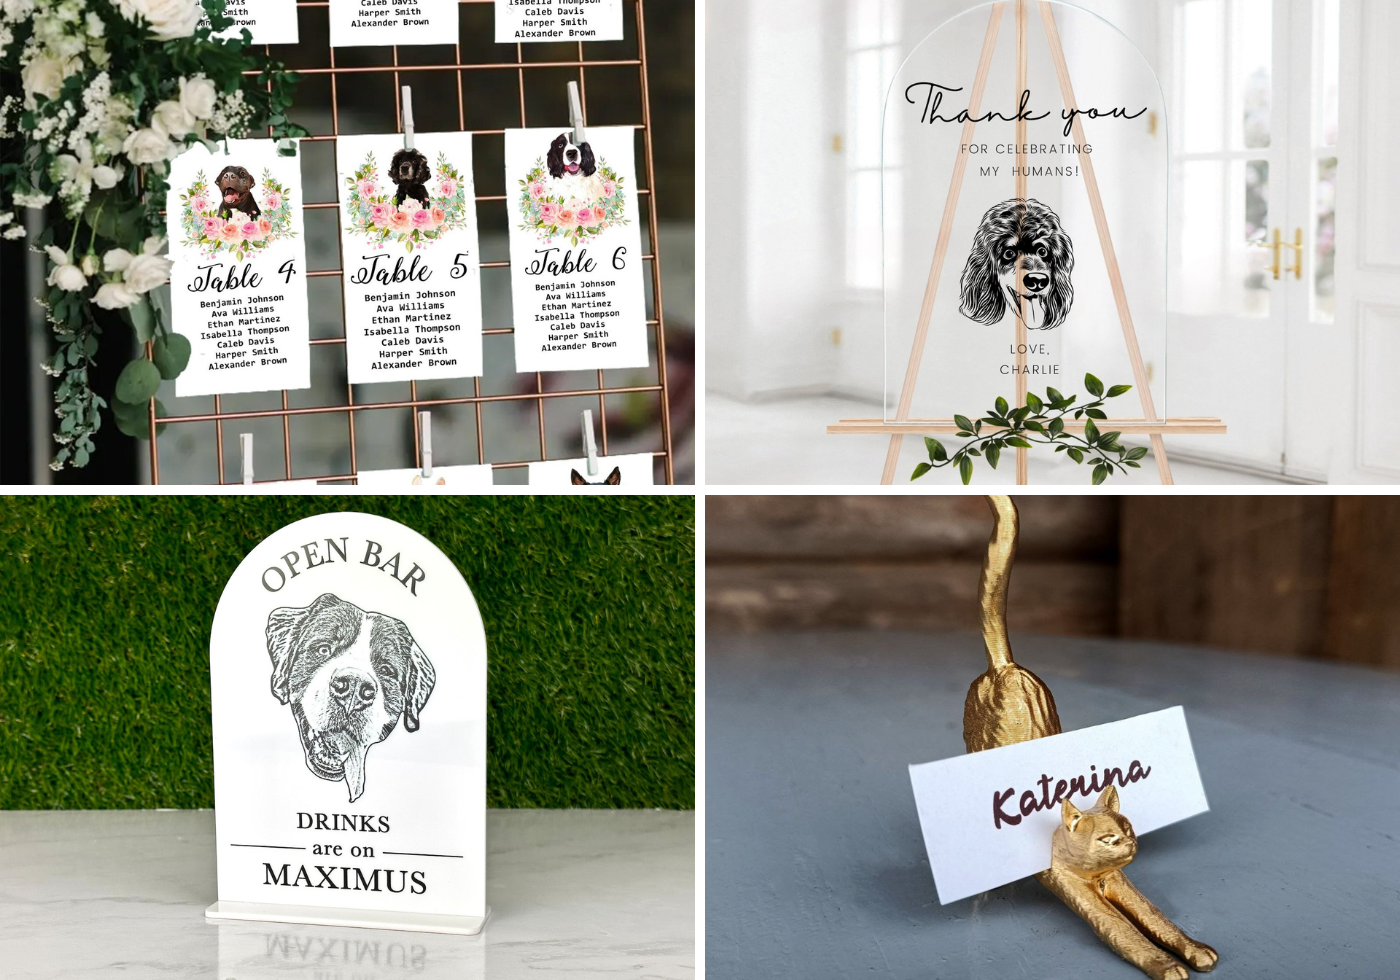 How to Include Your Pet in Your Wedding: Cute Ways to Honor Pets at Your Wedding